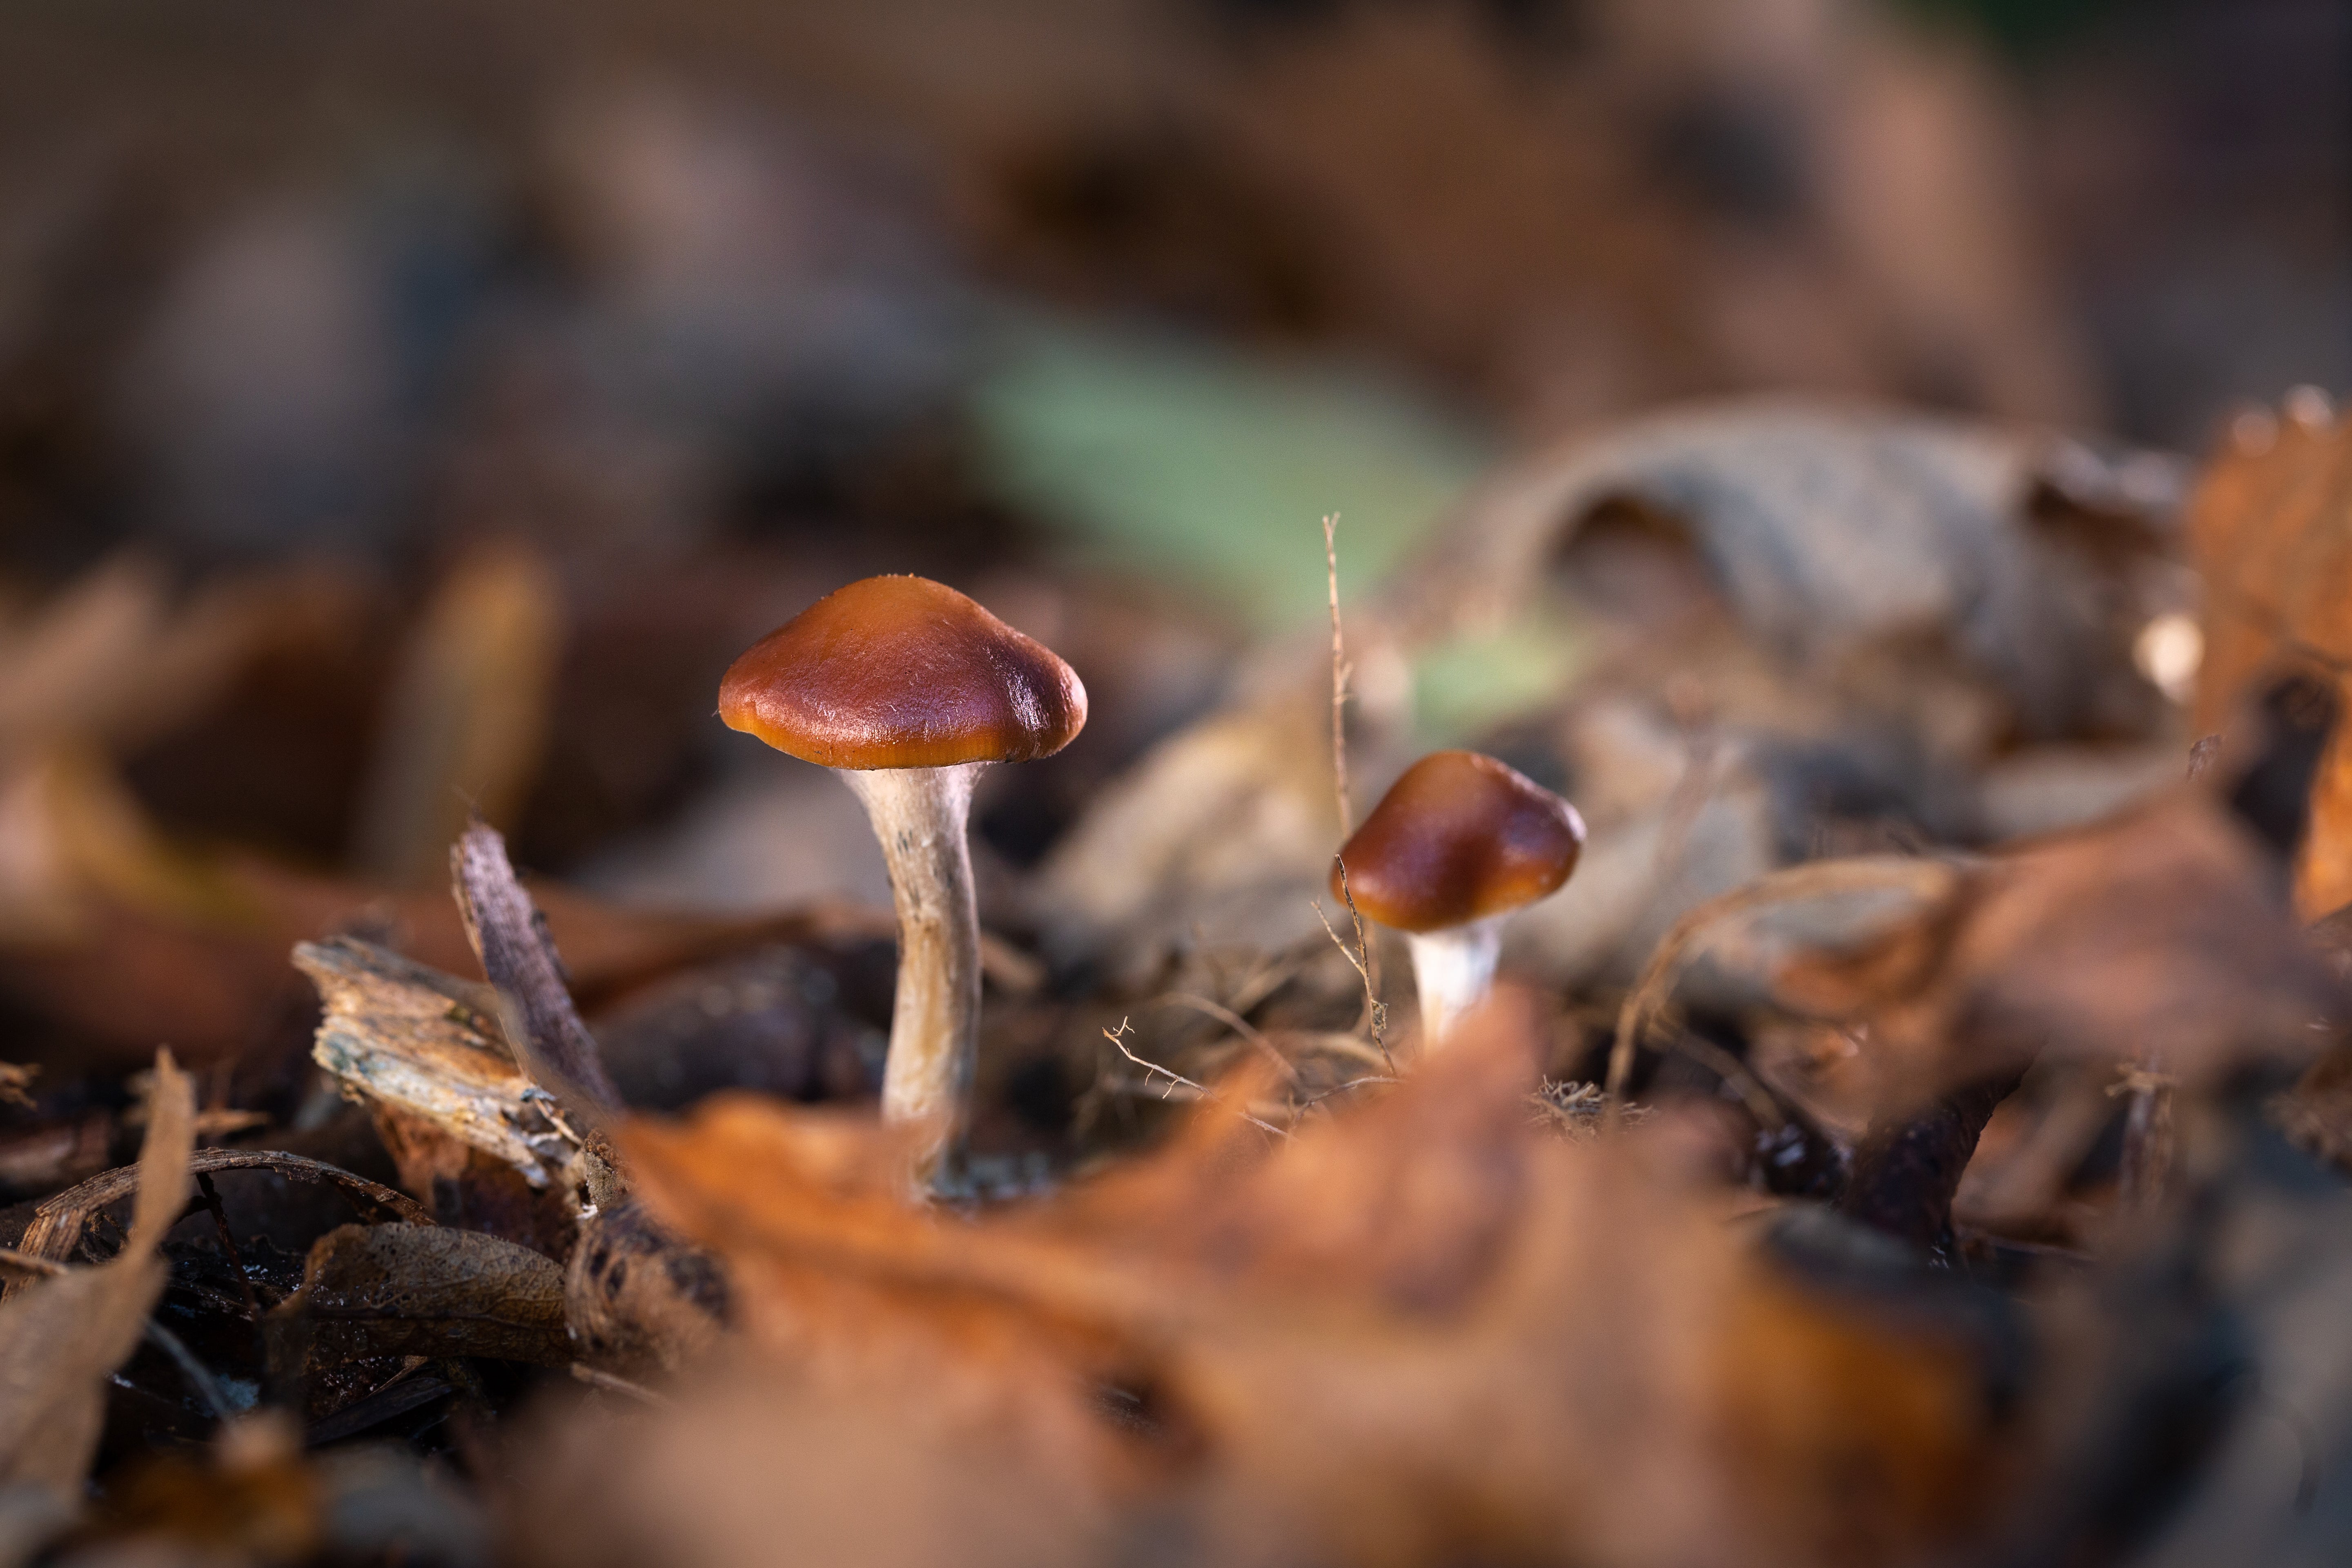 Magic mushrooms growing wild in a park in west London